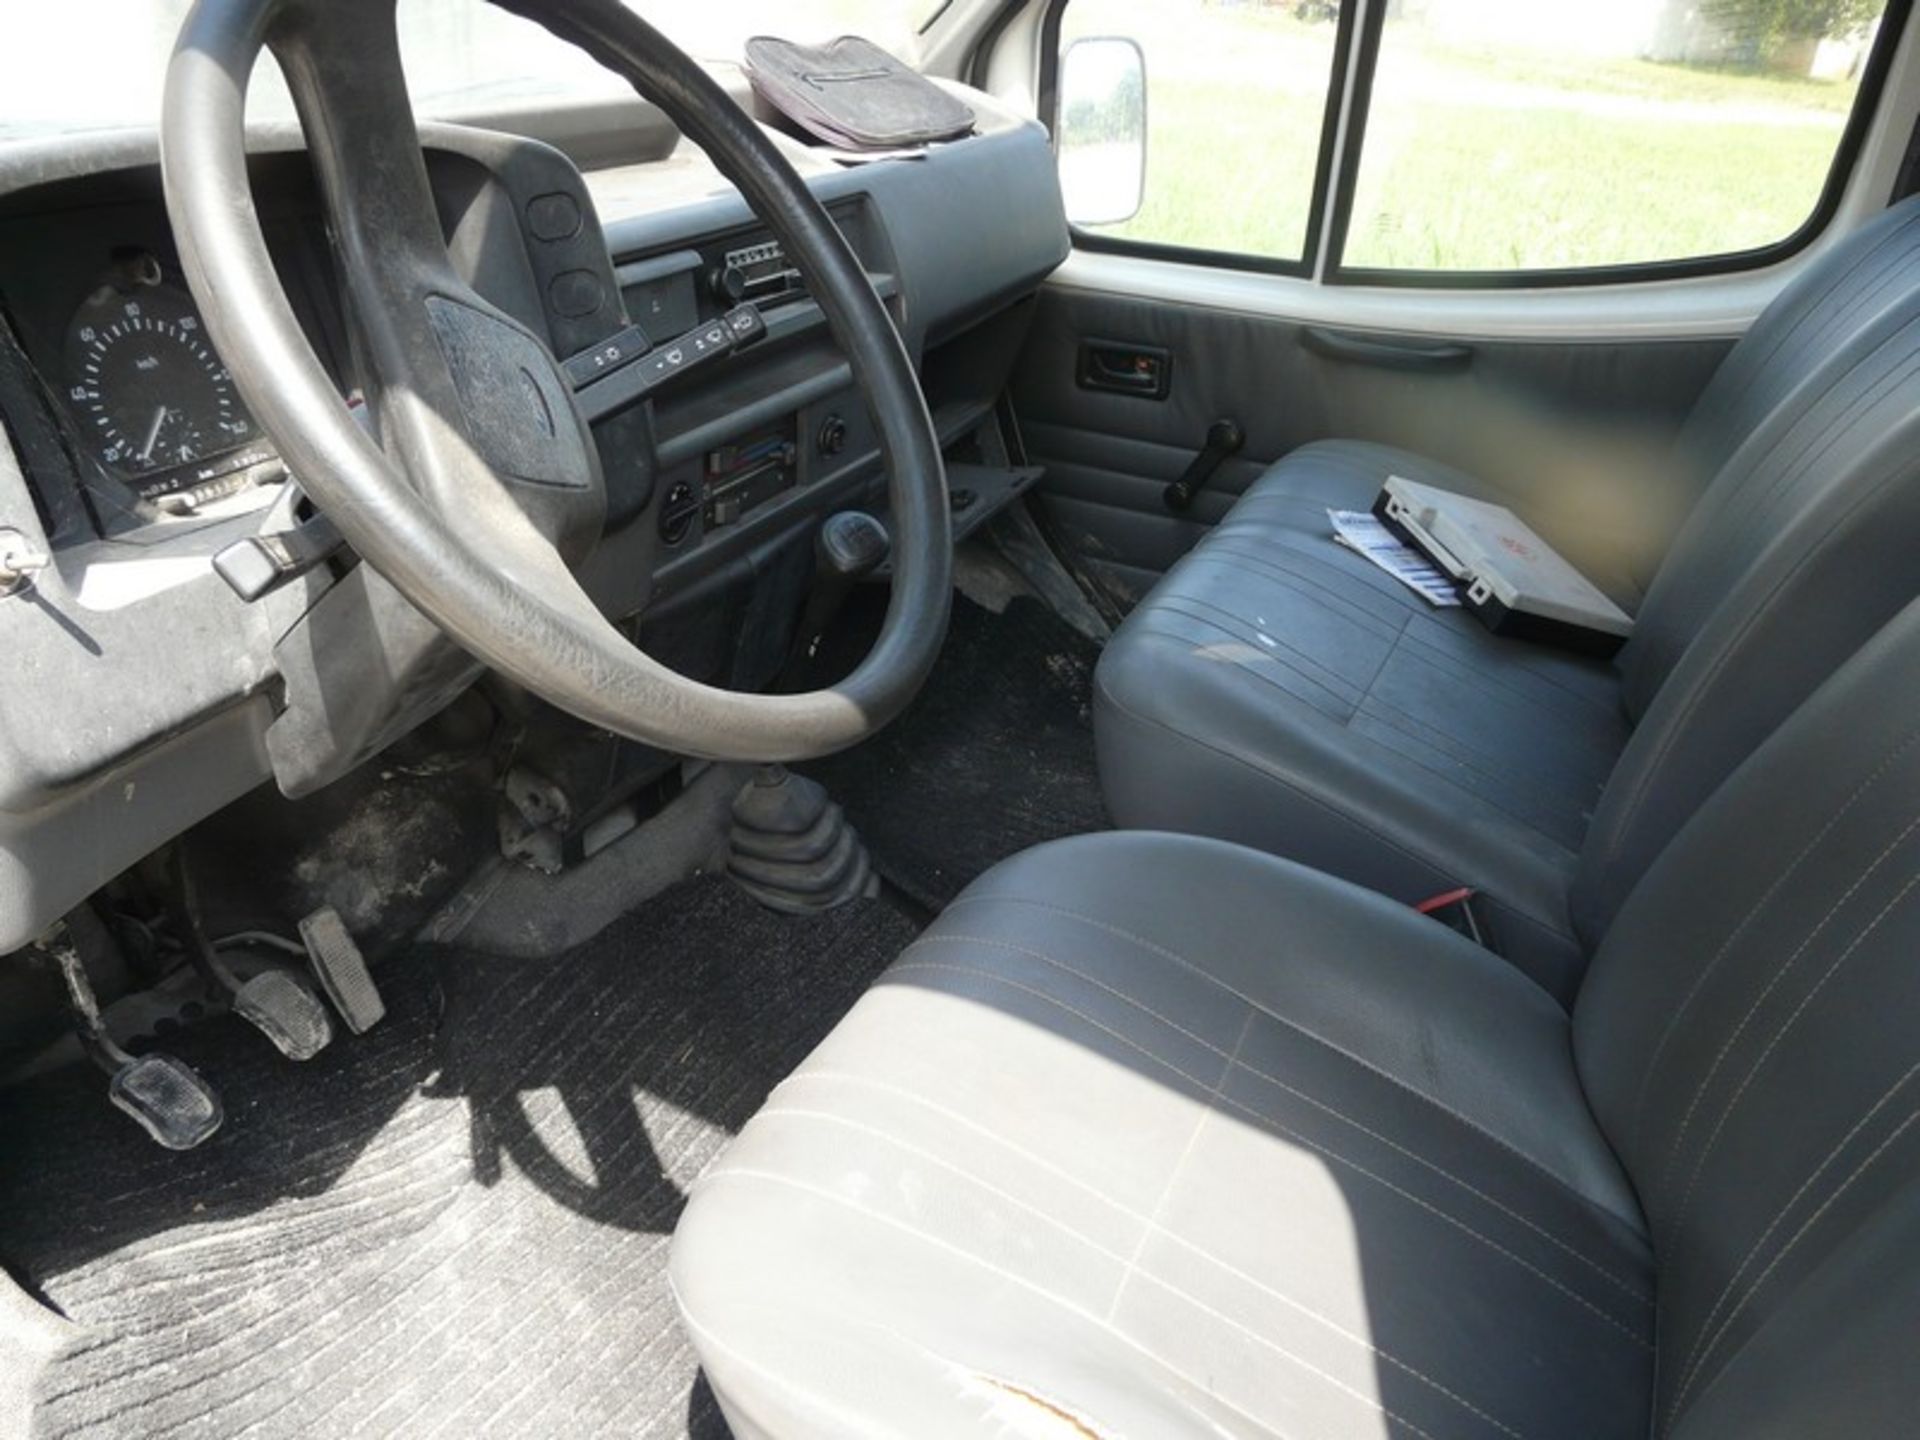 FORD TRANSIT ,BUSS ,REG NBB 8158,KM : 108611, SEAT 14, DIESEL , Y.O.M 1991 (Located in Greece - - Image 11 of 12